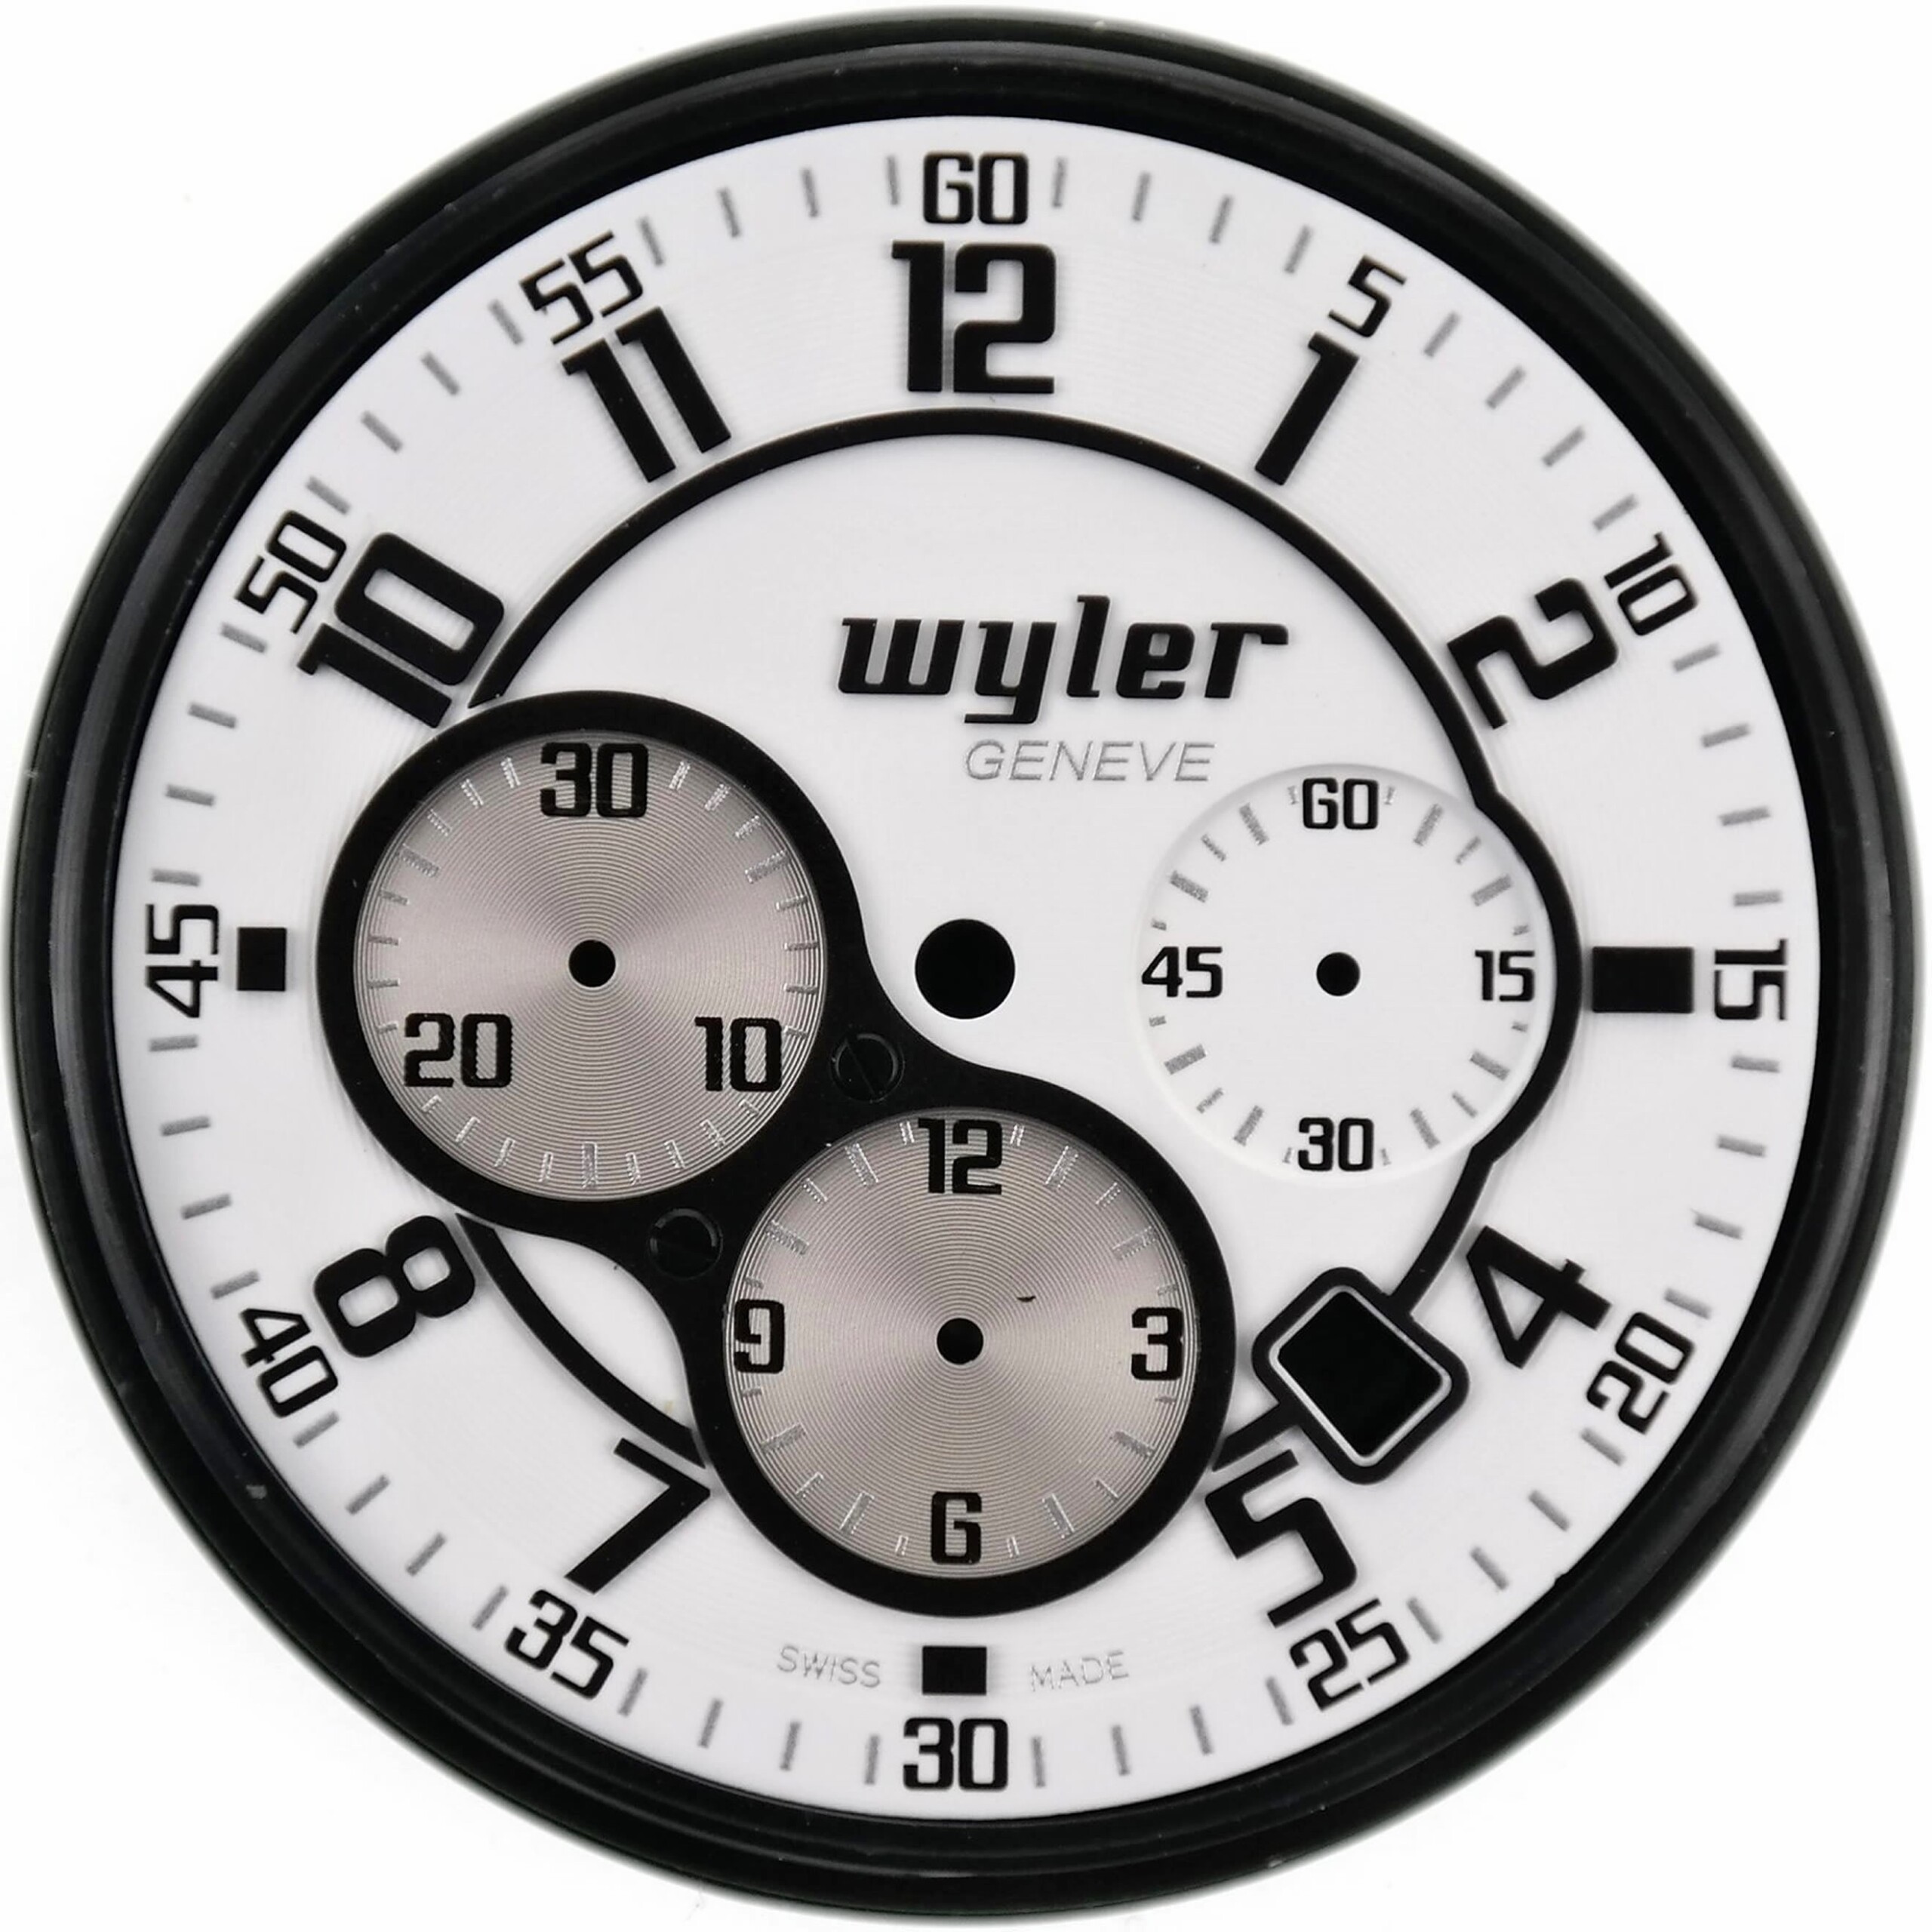 WYLER Geneve - Code R - Original Watch Case, Dial and Strap